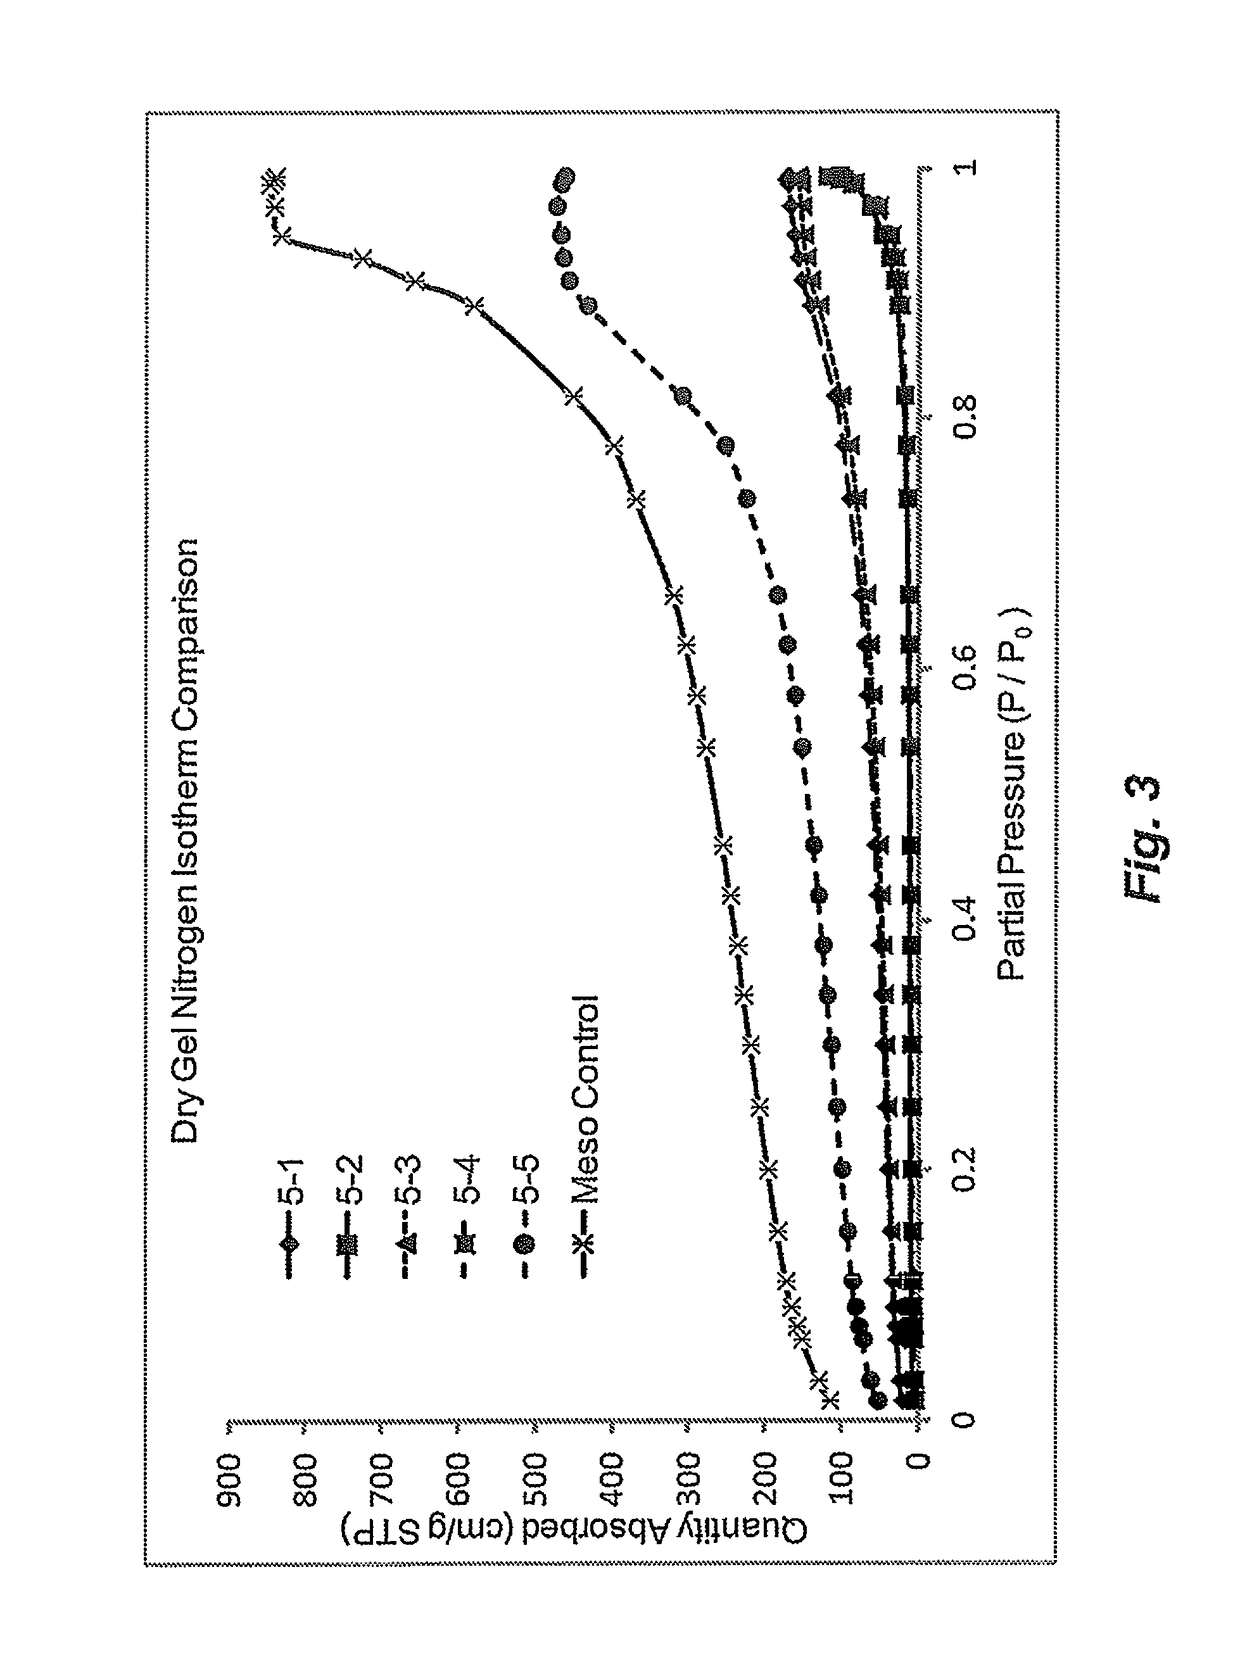 Preparation of polymeric resins and carbon materials